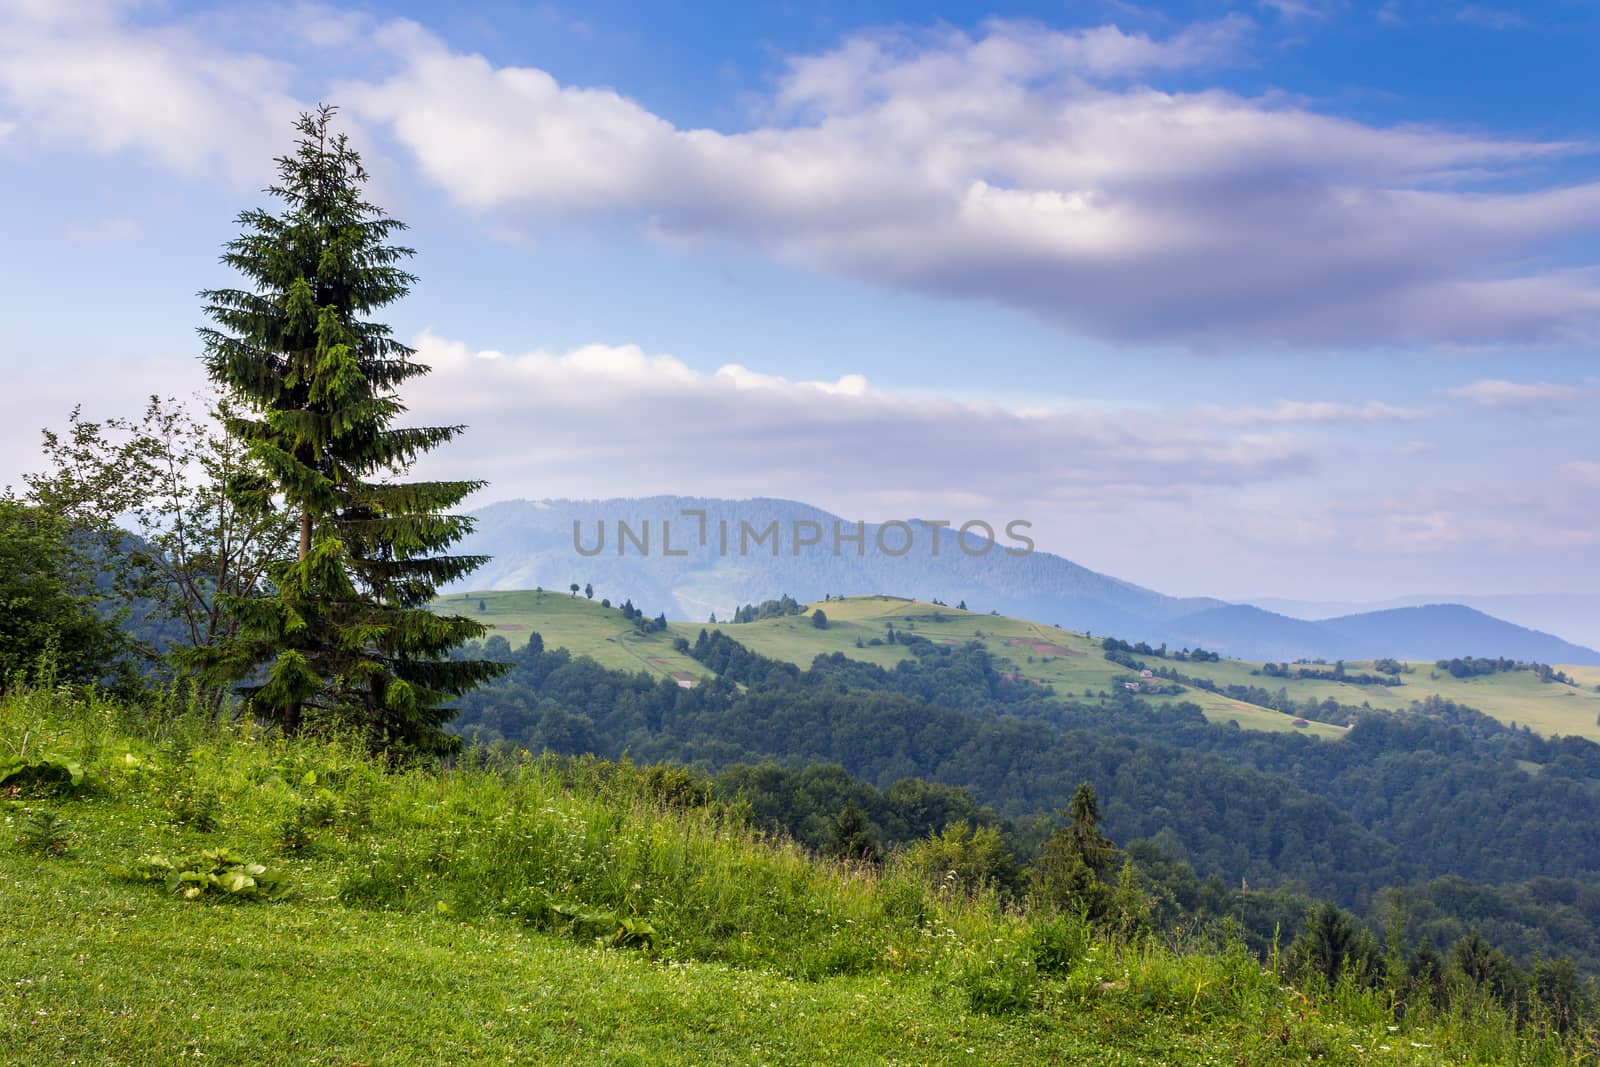 fir tree on the edge of clearing in mountains